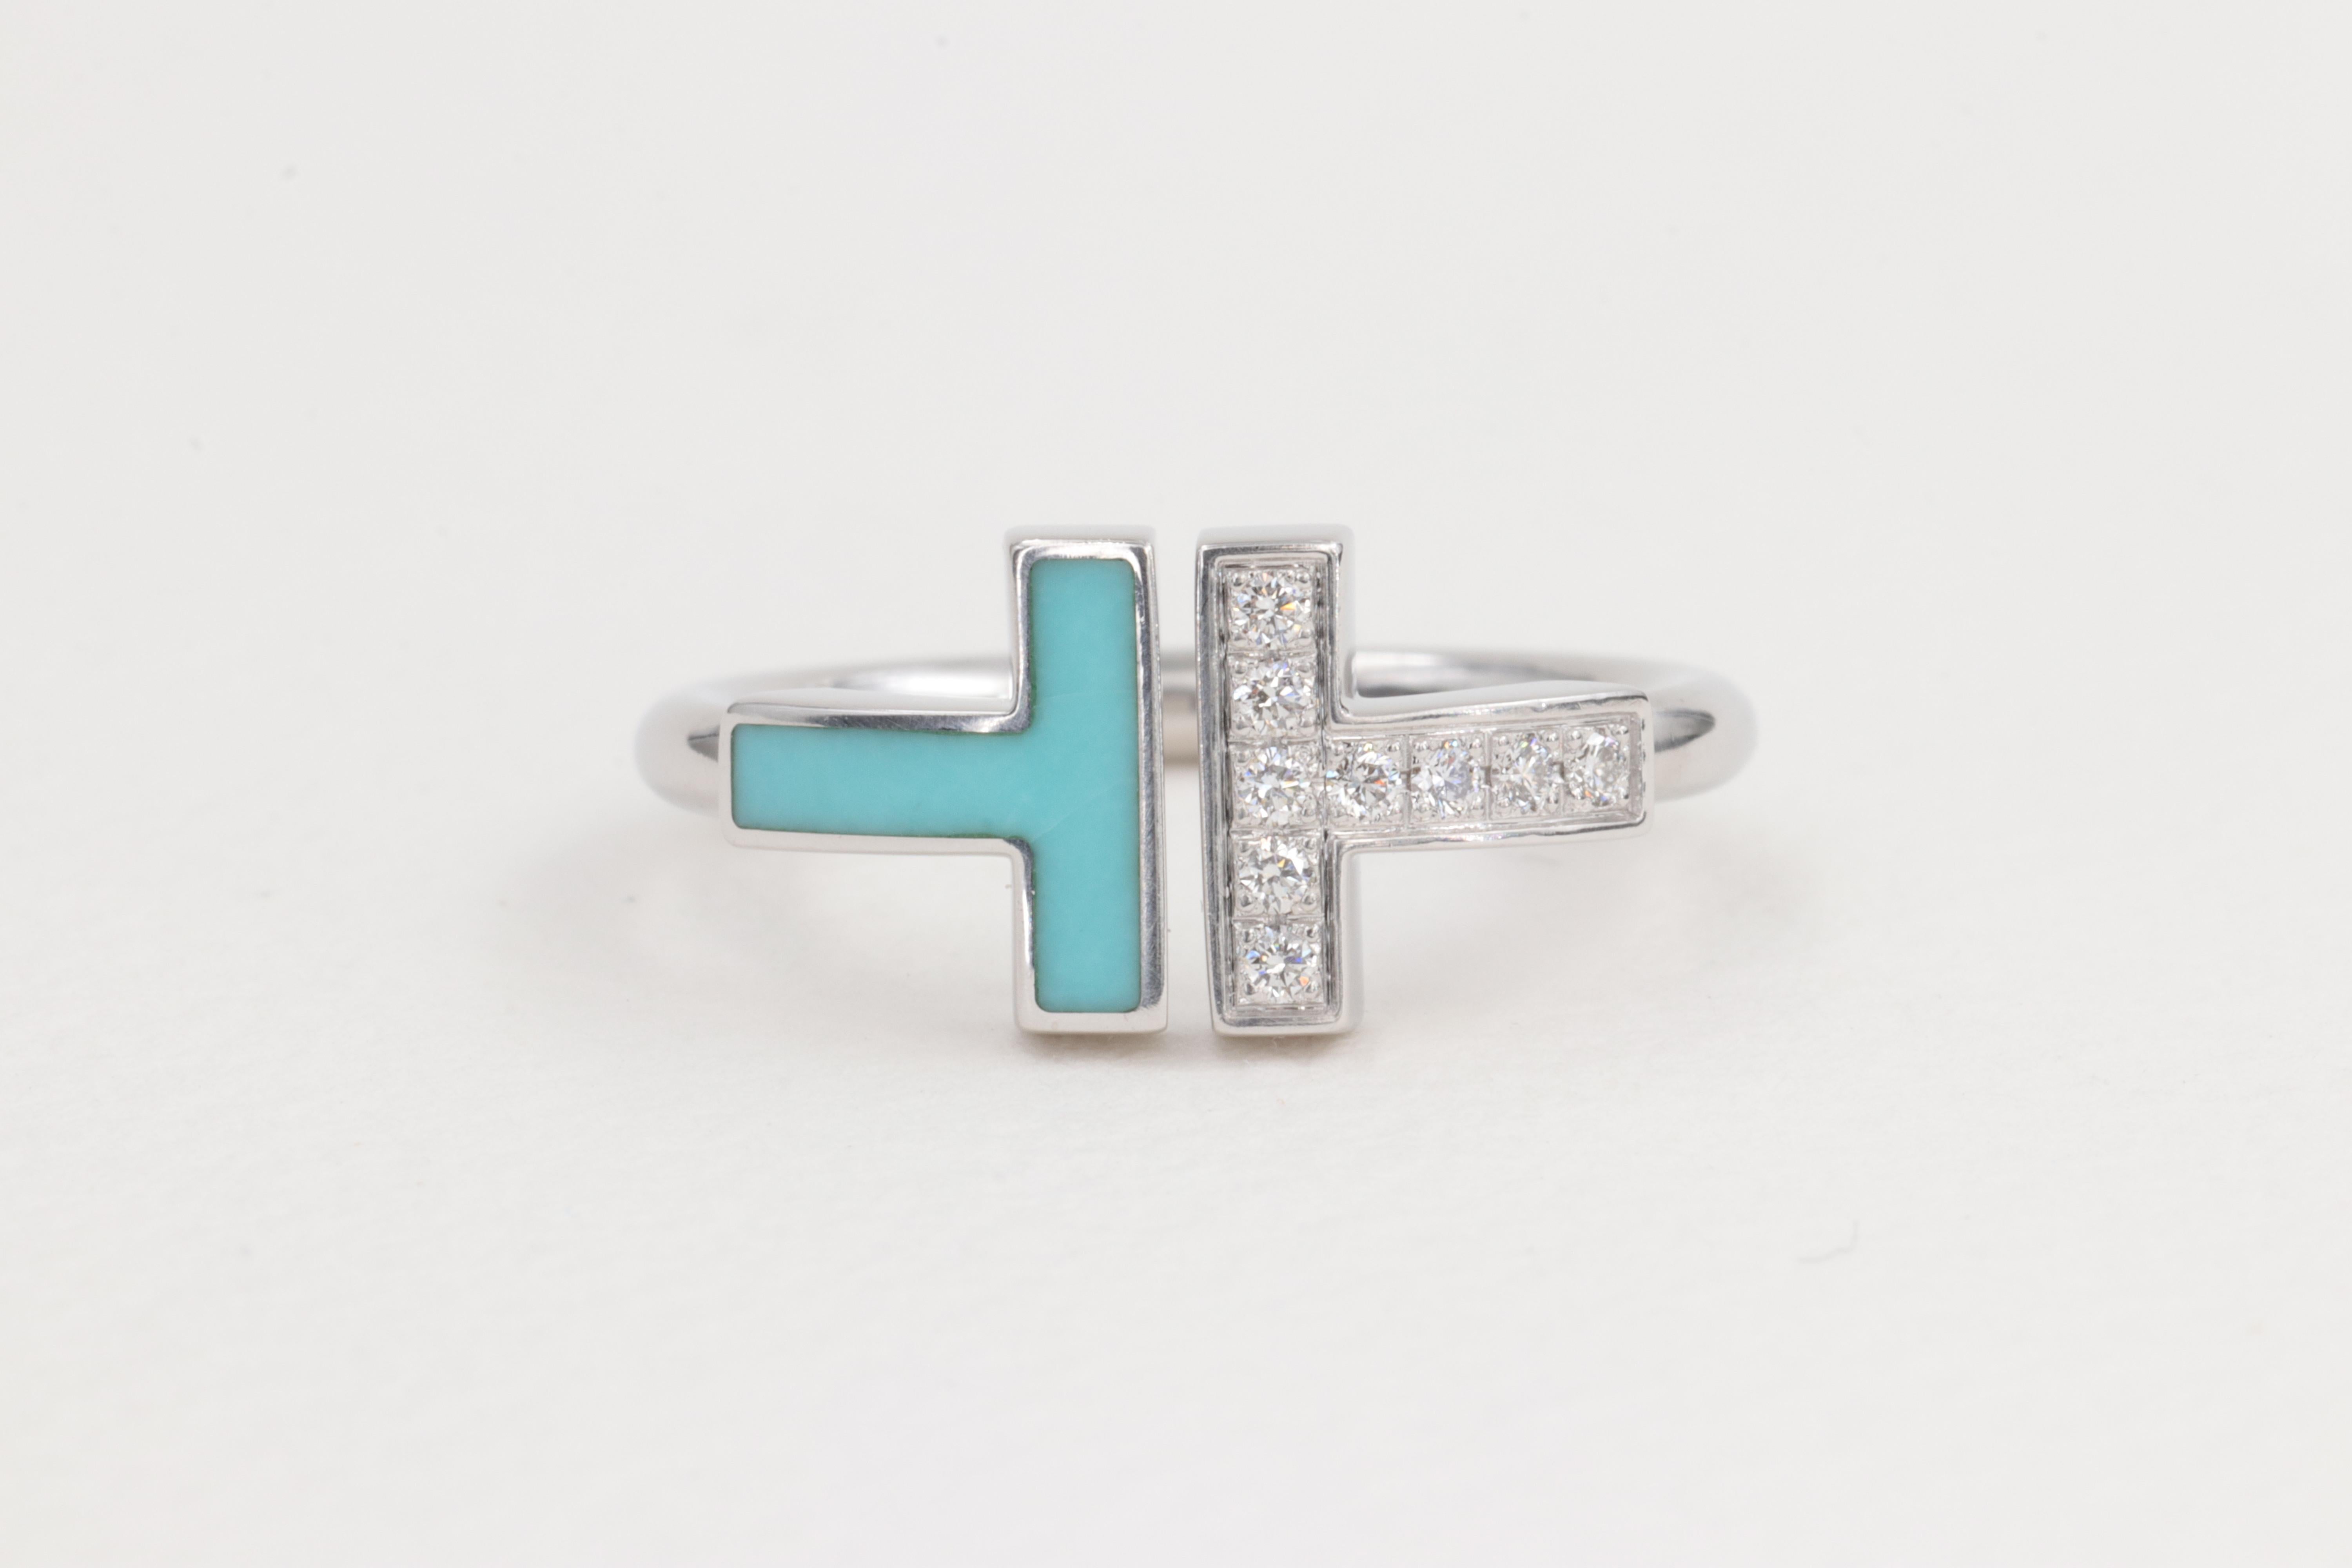 Tiffany & Co. Turquoise and Diamond T Wire Ring in 18 Karat White Gold

Diamonds :

Diamonds - 10 Stones = 0.10ctw 
Color -  D - F 
Clarities - VS+

Ring:

Metal - 18 Karat White Gold 
Weight - 4.2 Grams 

Size - 4.5 US 
      